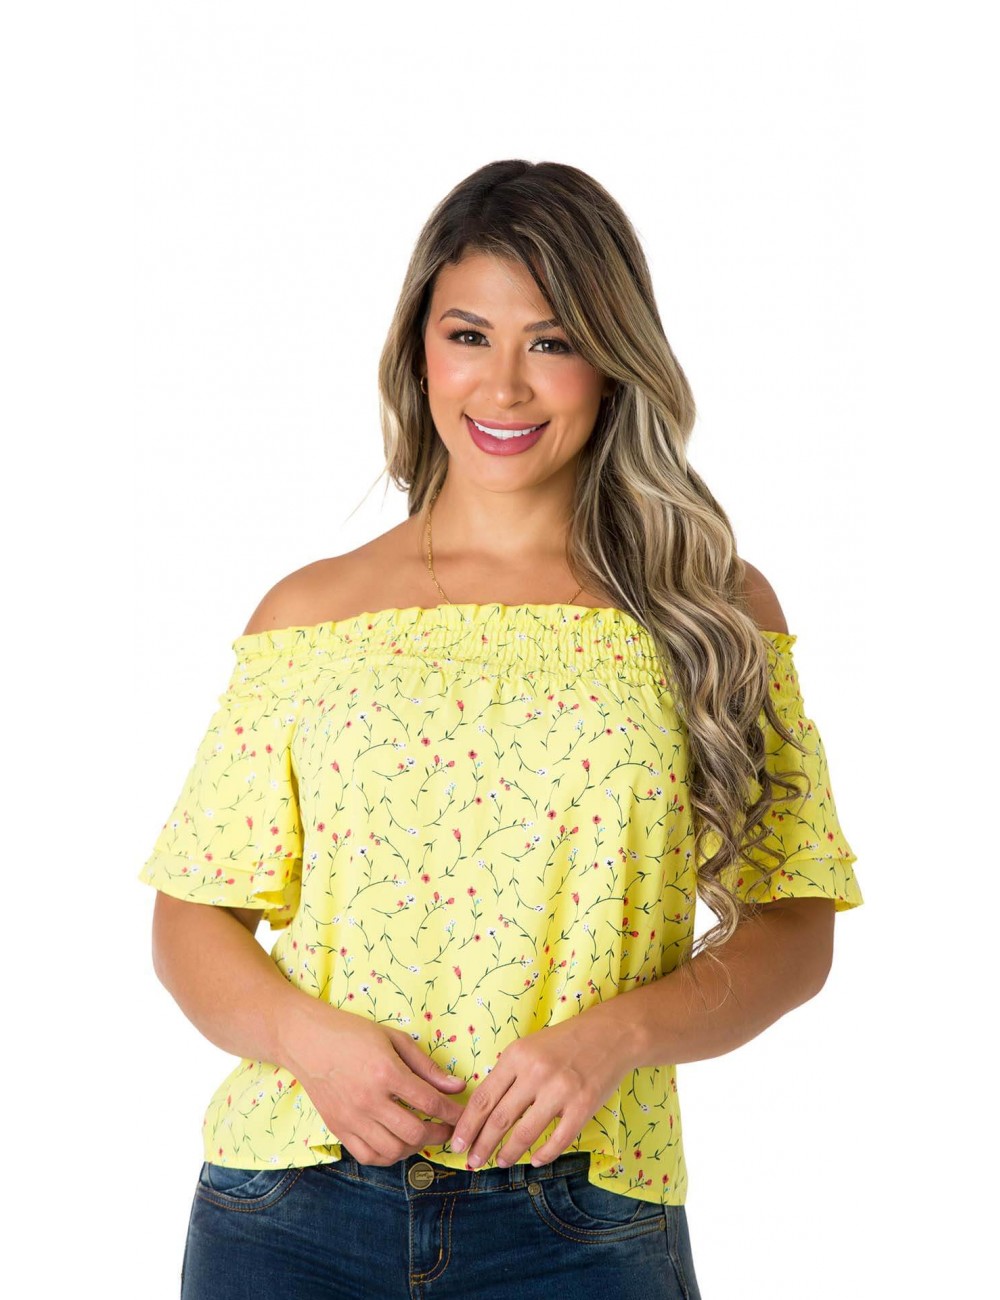 cable sanar deberes Floral Blouse With Uncovered Shoulders 2B4755B